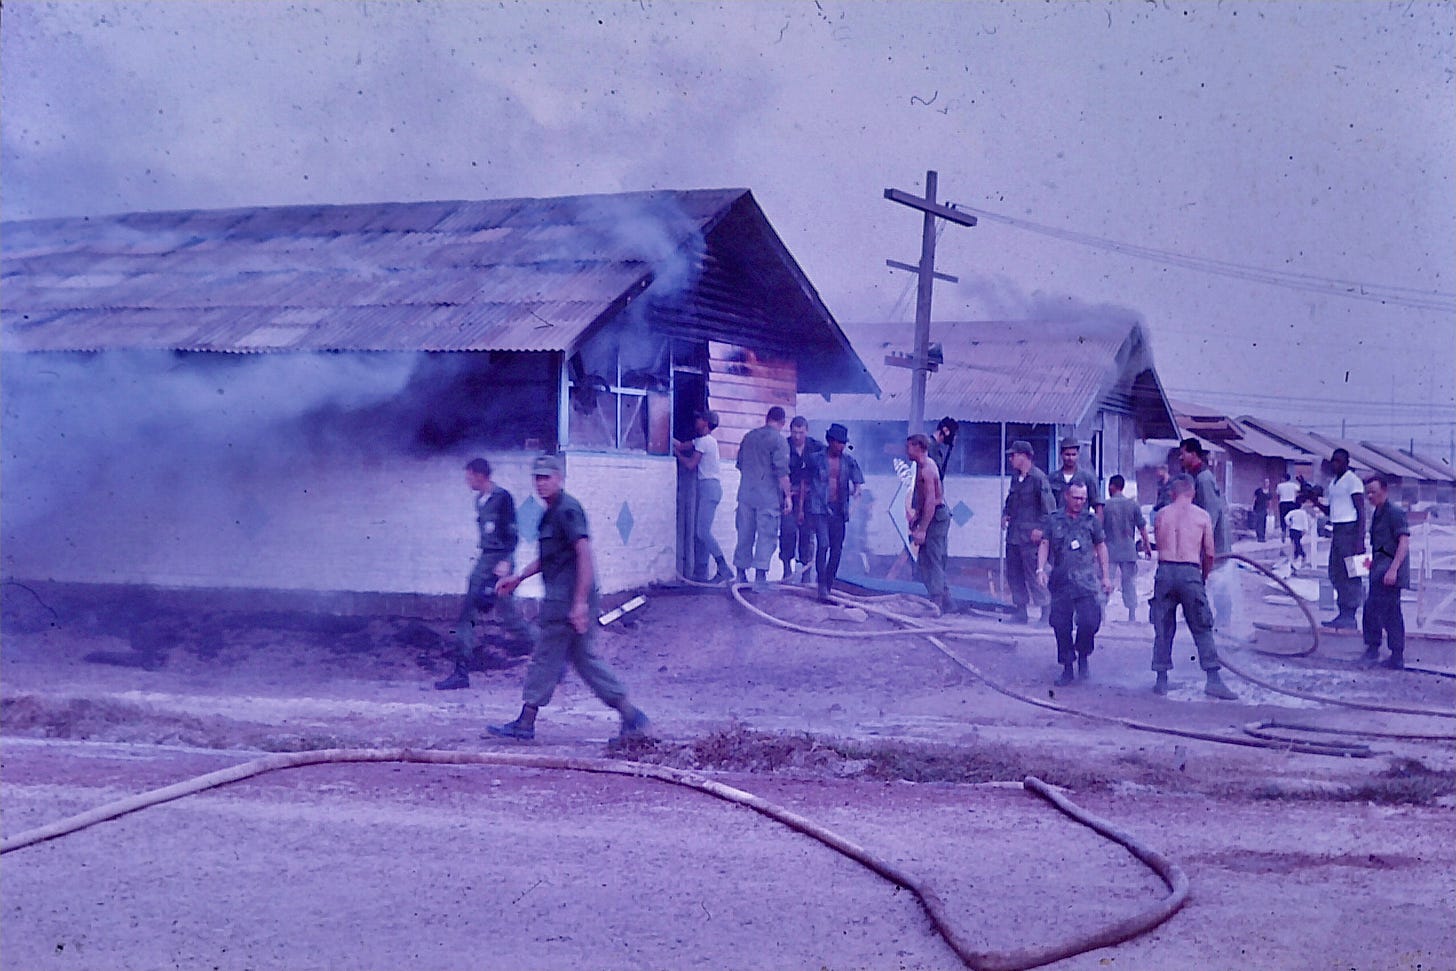 116th Aviation Battalion mess hall was hit by a rocket attack. 📸: Củ Chi, Vietnam. 1968.